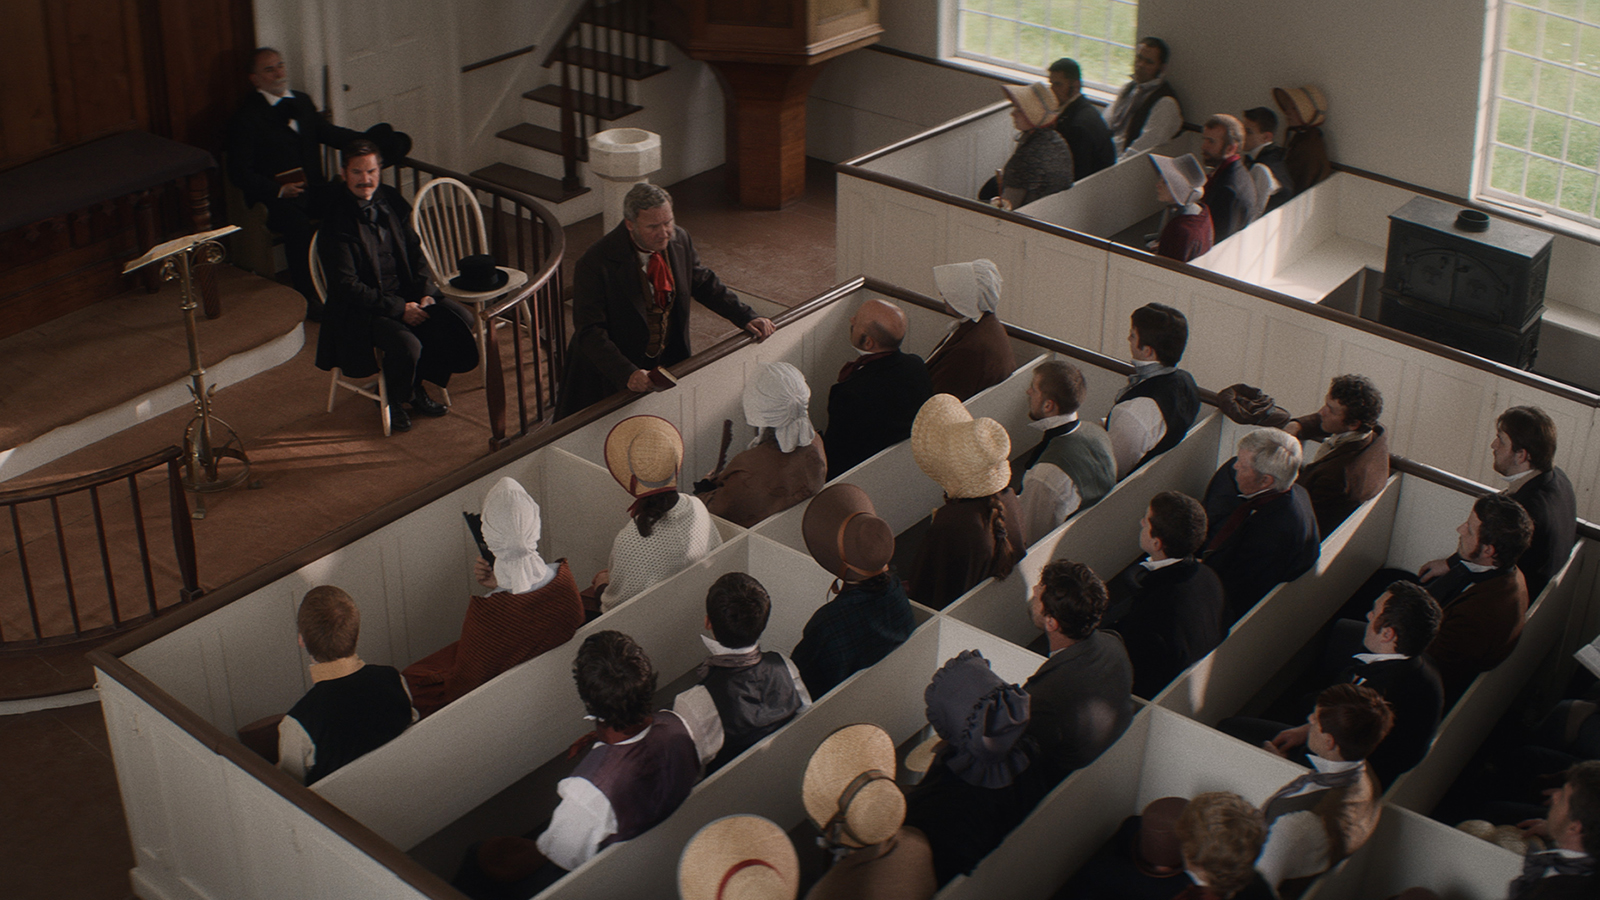 ‘The Hopeful,’ film about Adventist origins, debuts in theaters